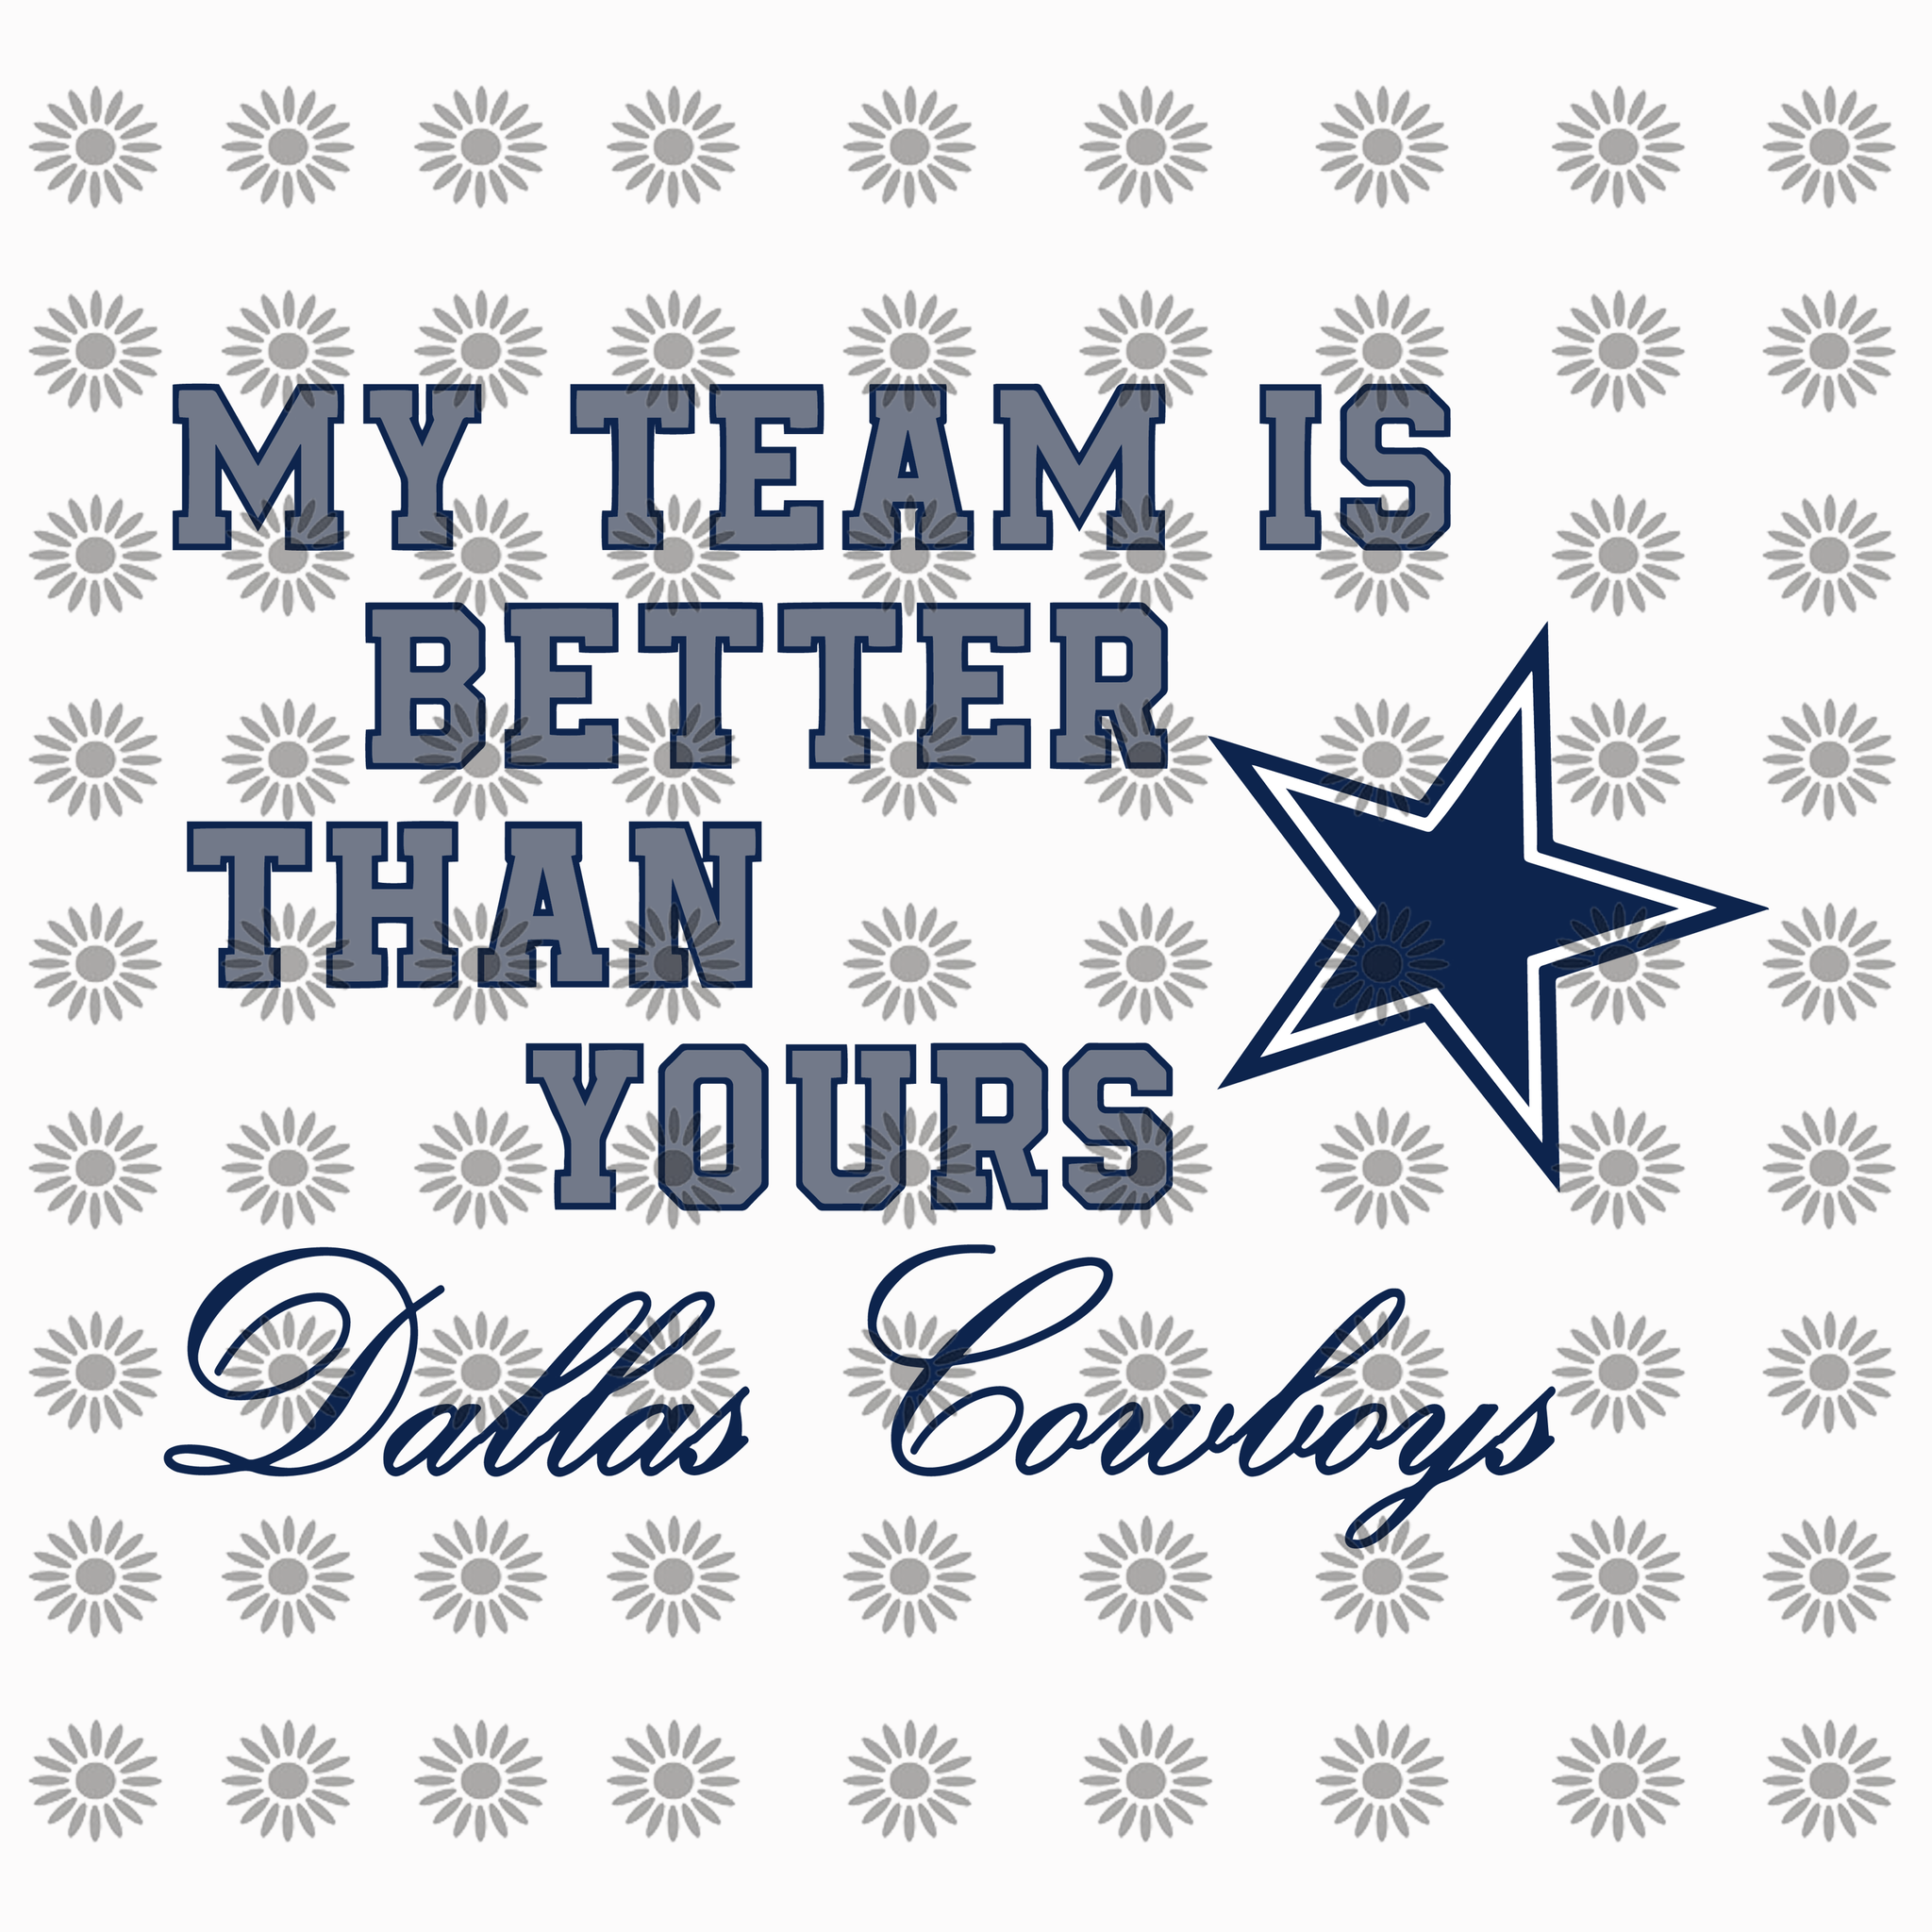 My team is better than yours dallas cowboys, Dallas Cowboys svg, Cowboys svg, Football svg, Dallas Cowboys logo, Dallas Cowboys, skull Dallas Cowboys file,Svg, png, dxf,eps file for Cricut, Silhouette